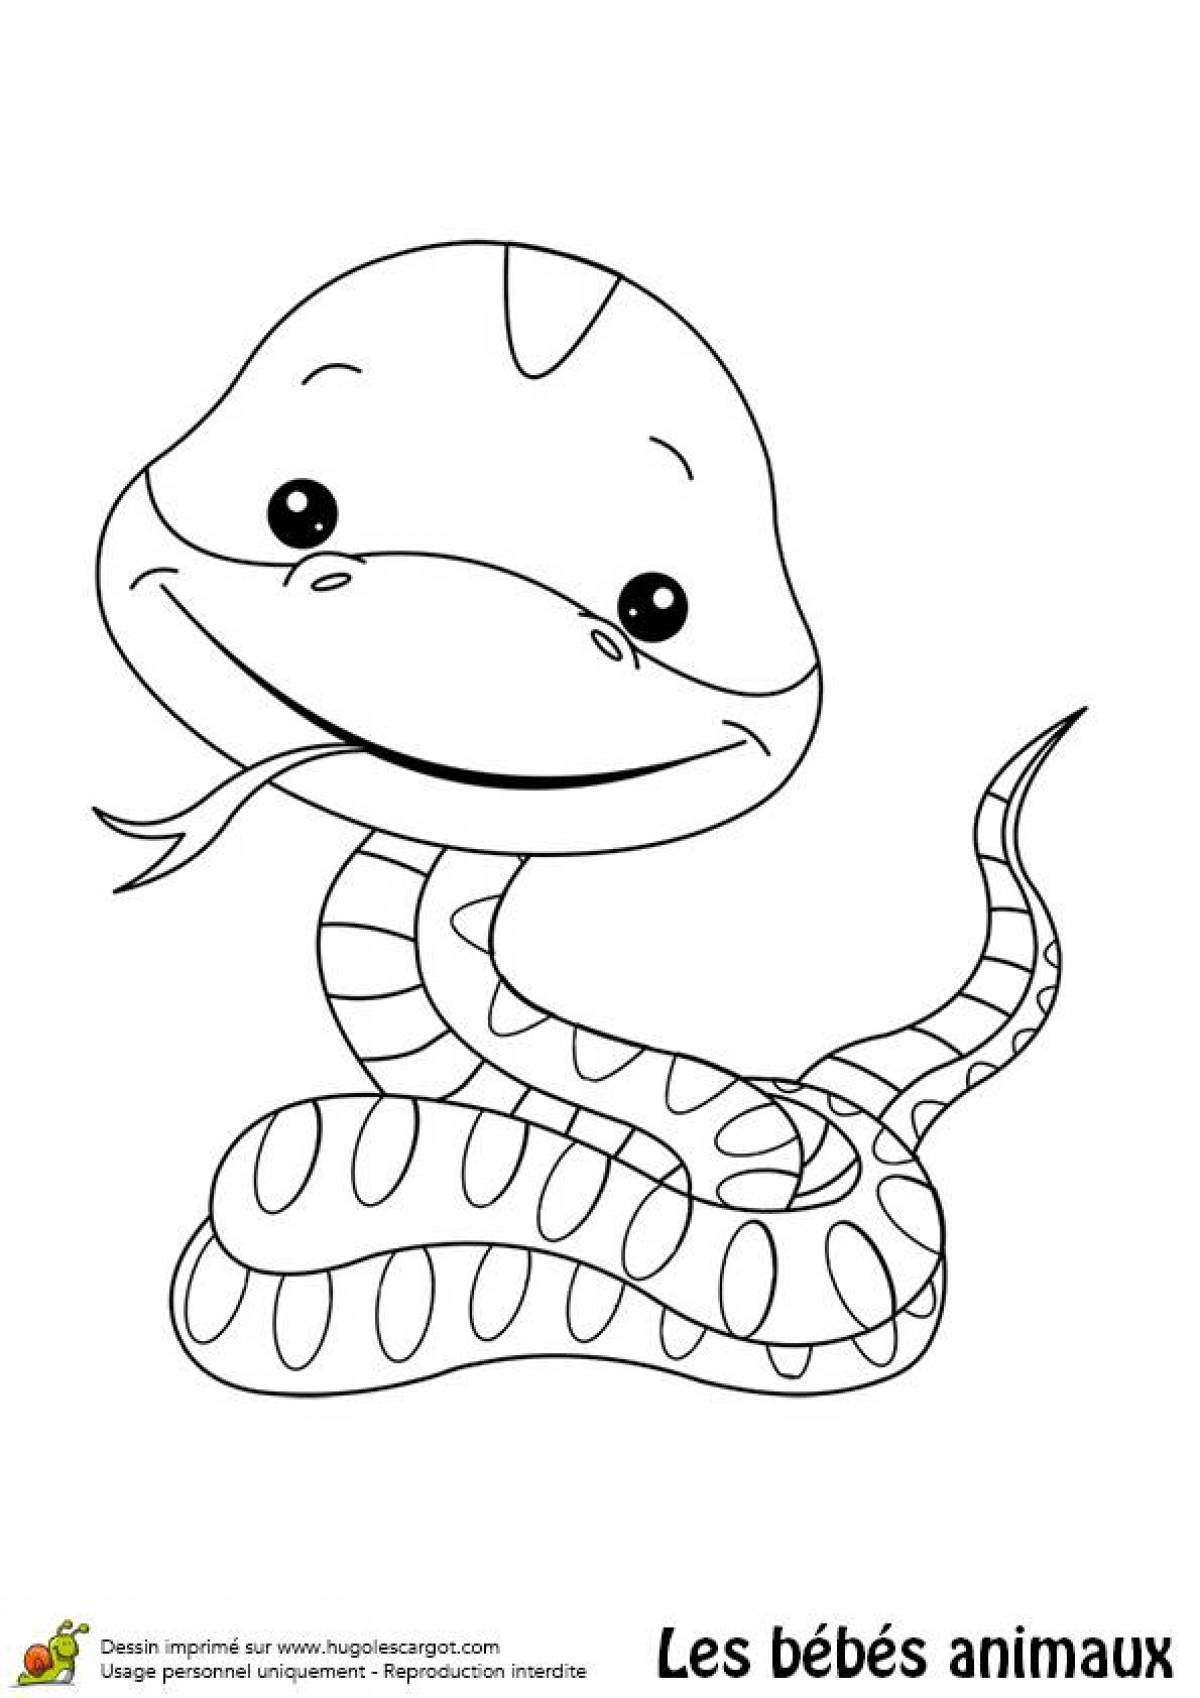 Vibrant snake coloring page for kids